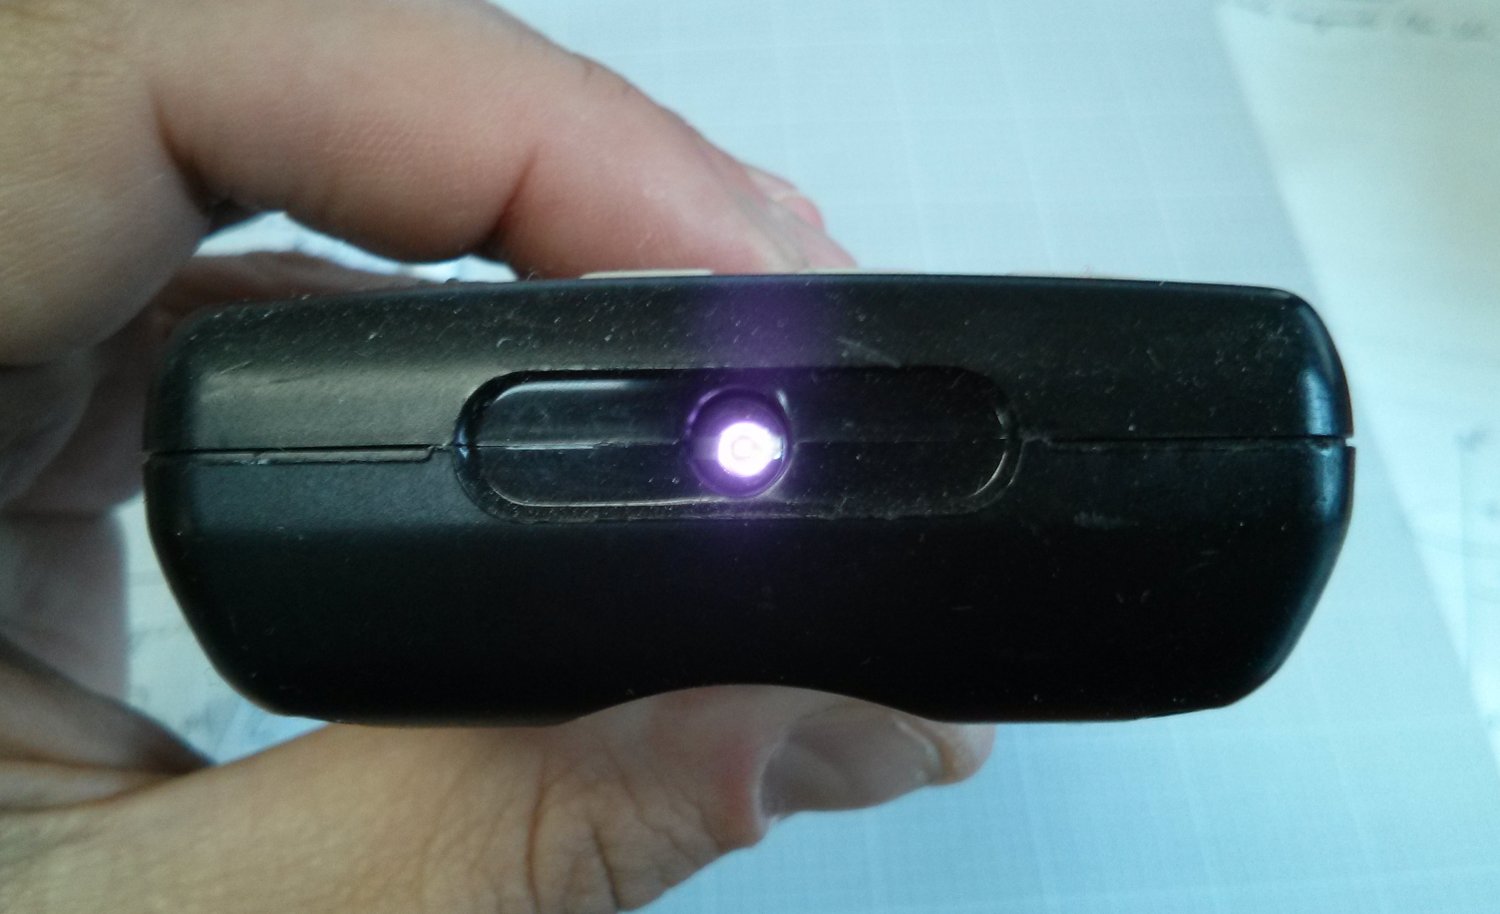 The IR LED on the remote turns purple on the camera.  Source.